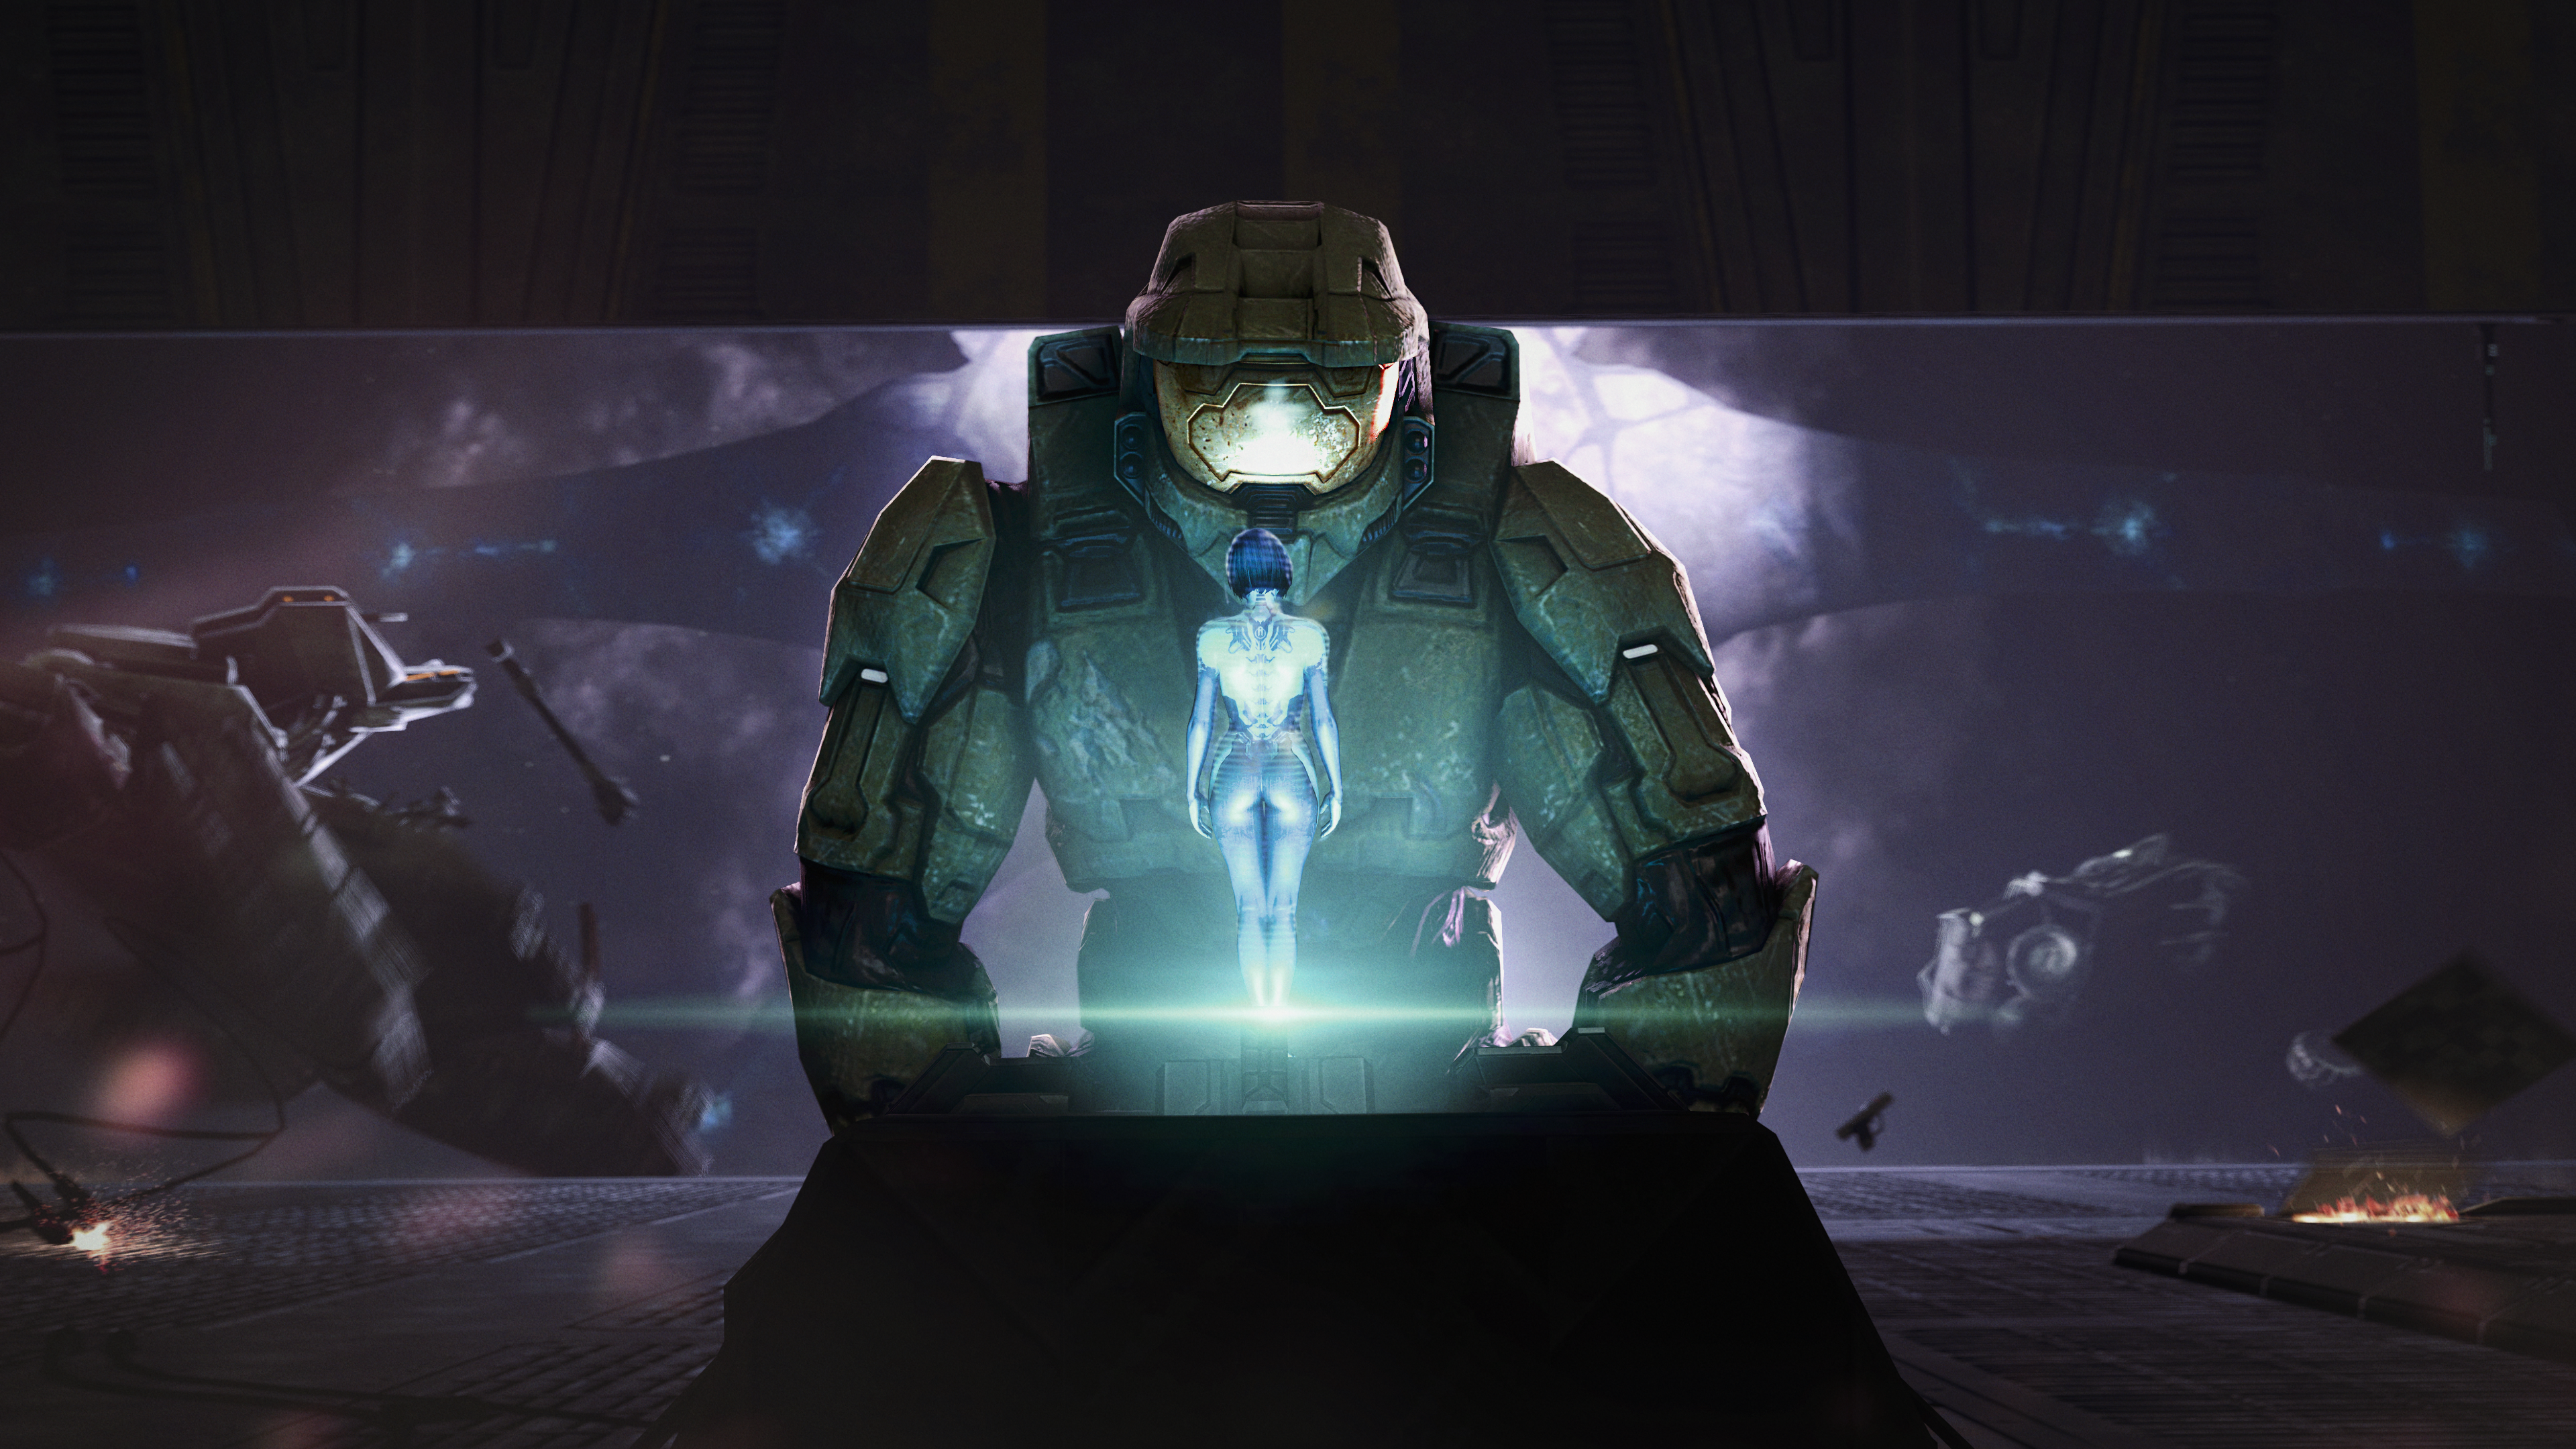 Made a 4K wallpaper based on my favourite shot from Halo 3